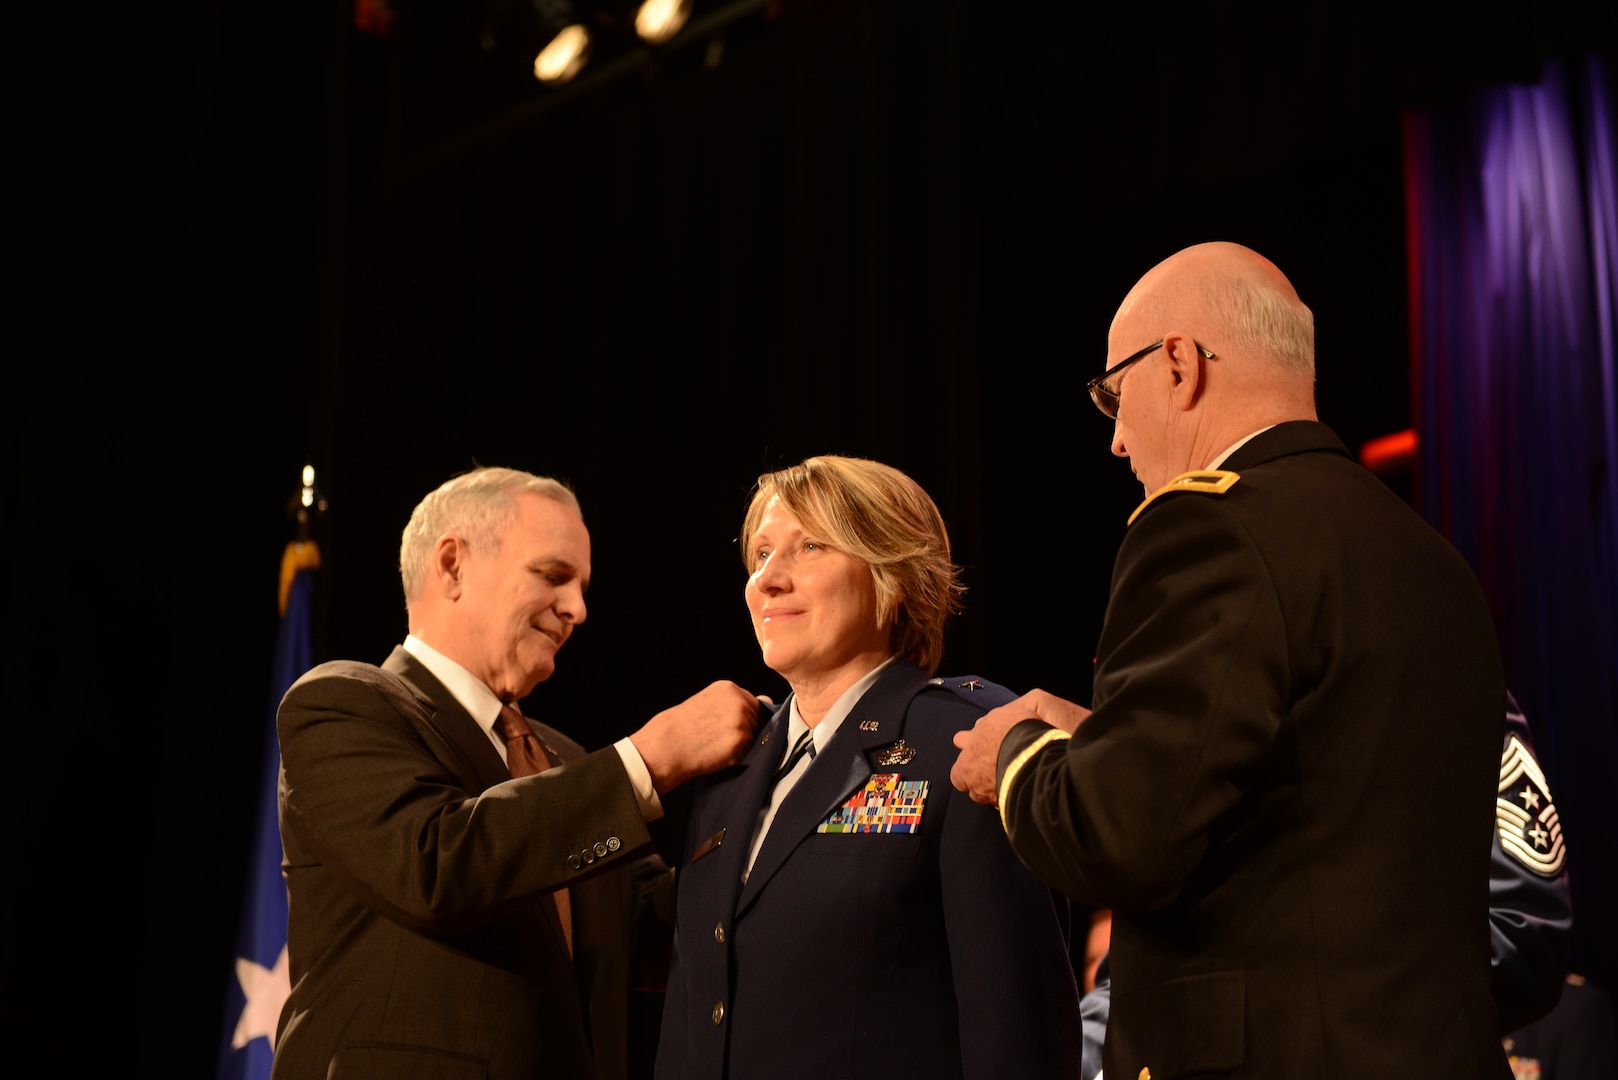 Air Force Col. Sandra L. Best is promoted to brigadier general by Minnesota Gov. Mark Dayton and Minnesota National Guard Adjutant General Maj. Gen. Richard Nash during a ceremony, February 25, 2016, in Minneapolis. Best is the first female general officer in the Minnesota National Guard. 